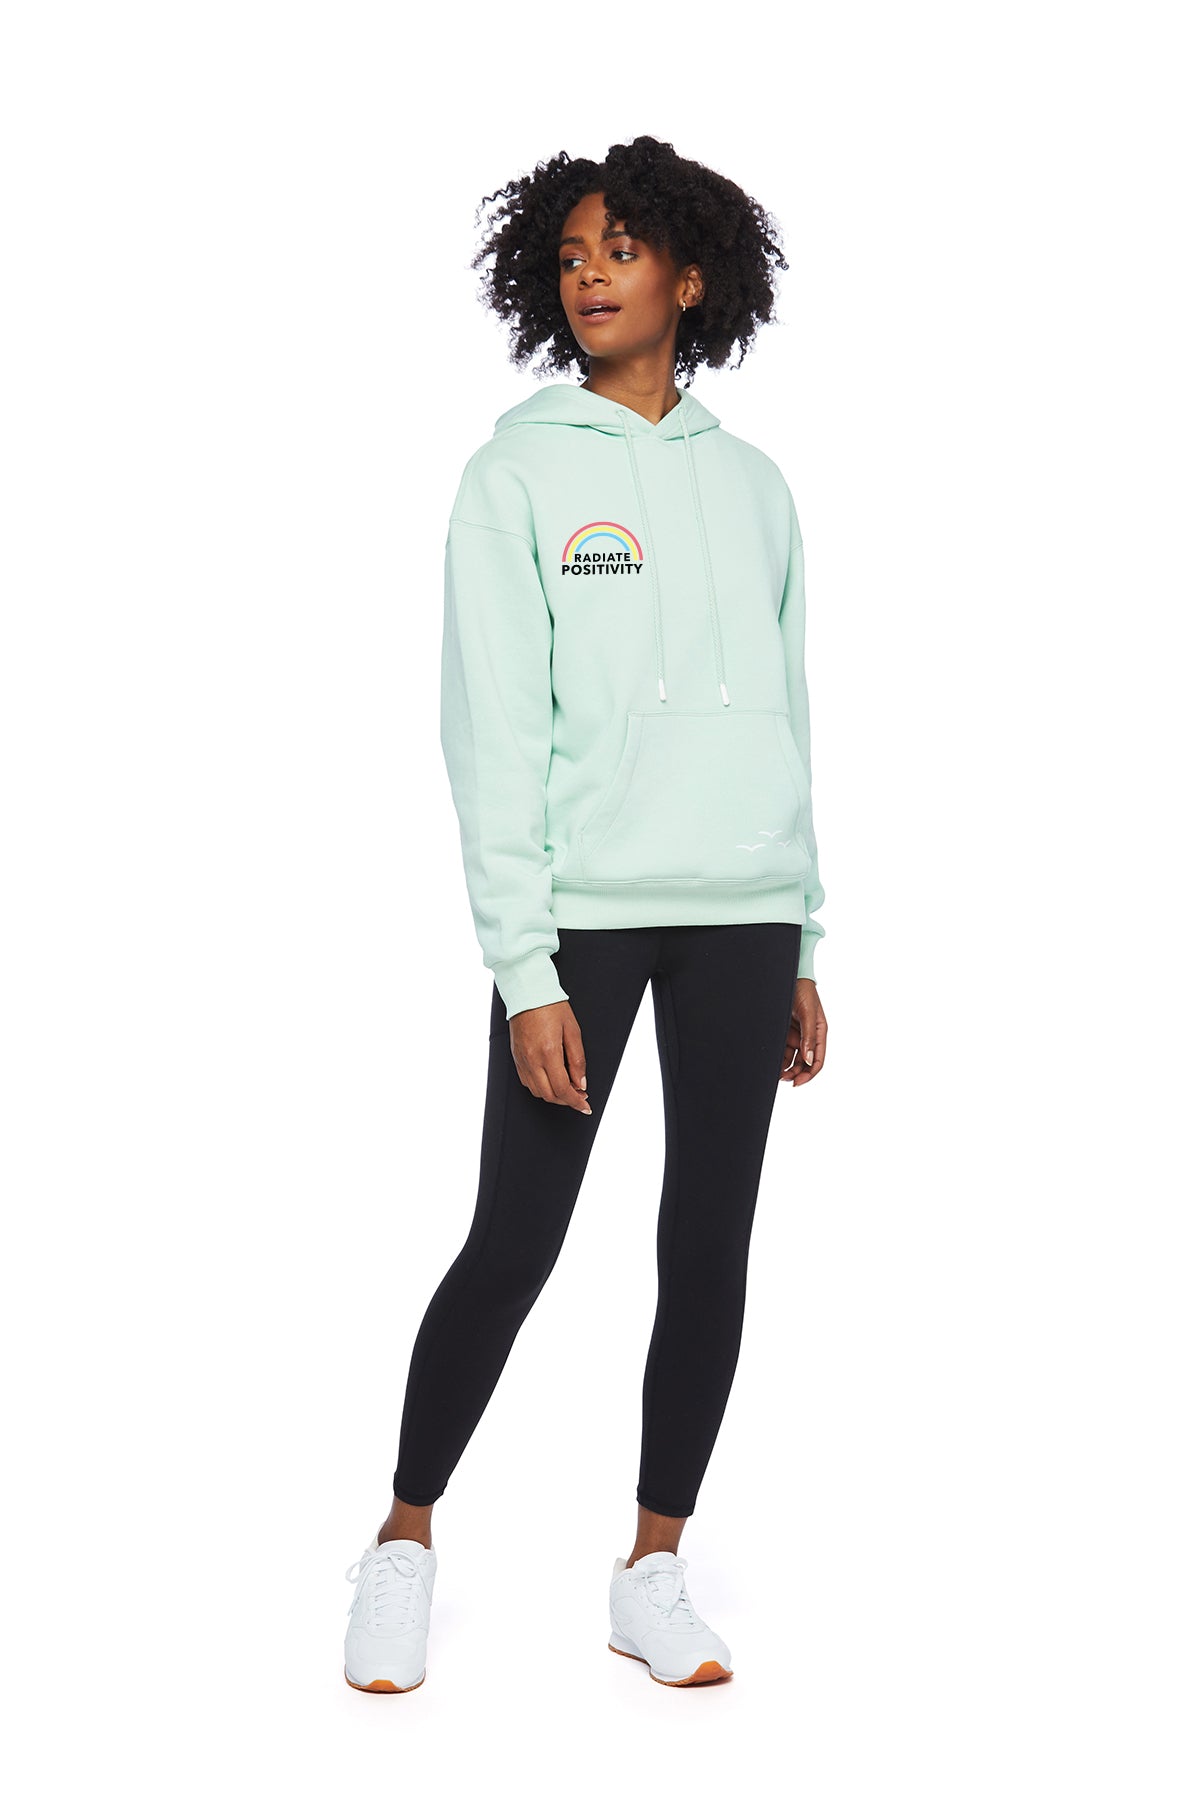 Chloe Earth Day Hoodie in Mint from Lazypants - always a great buy at a reasonable price.